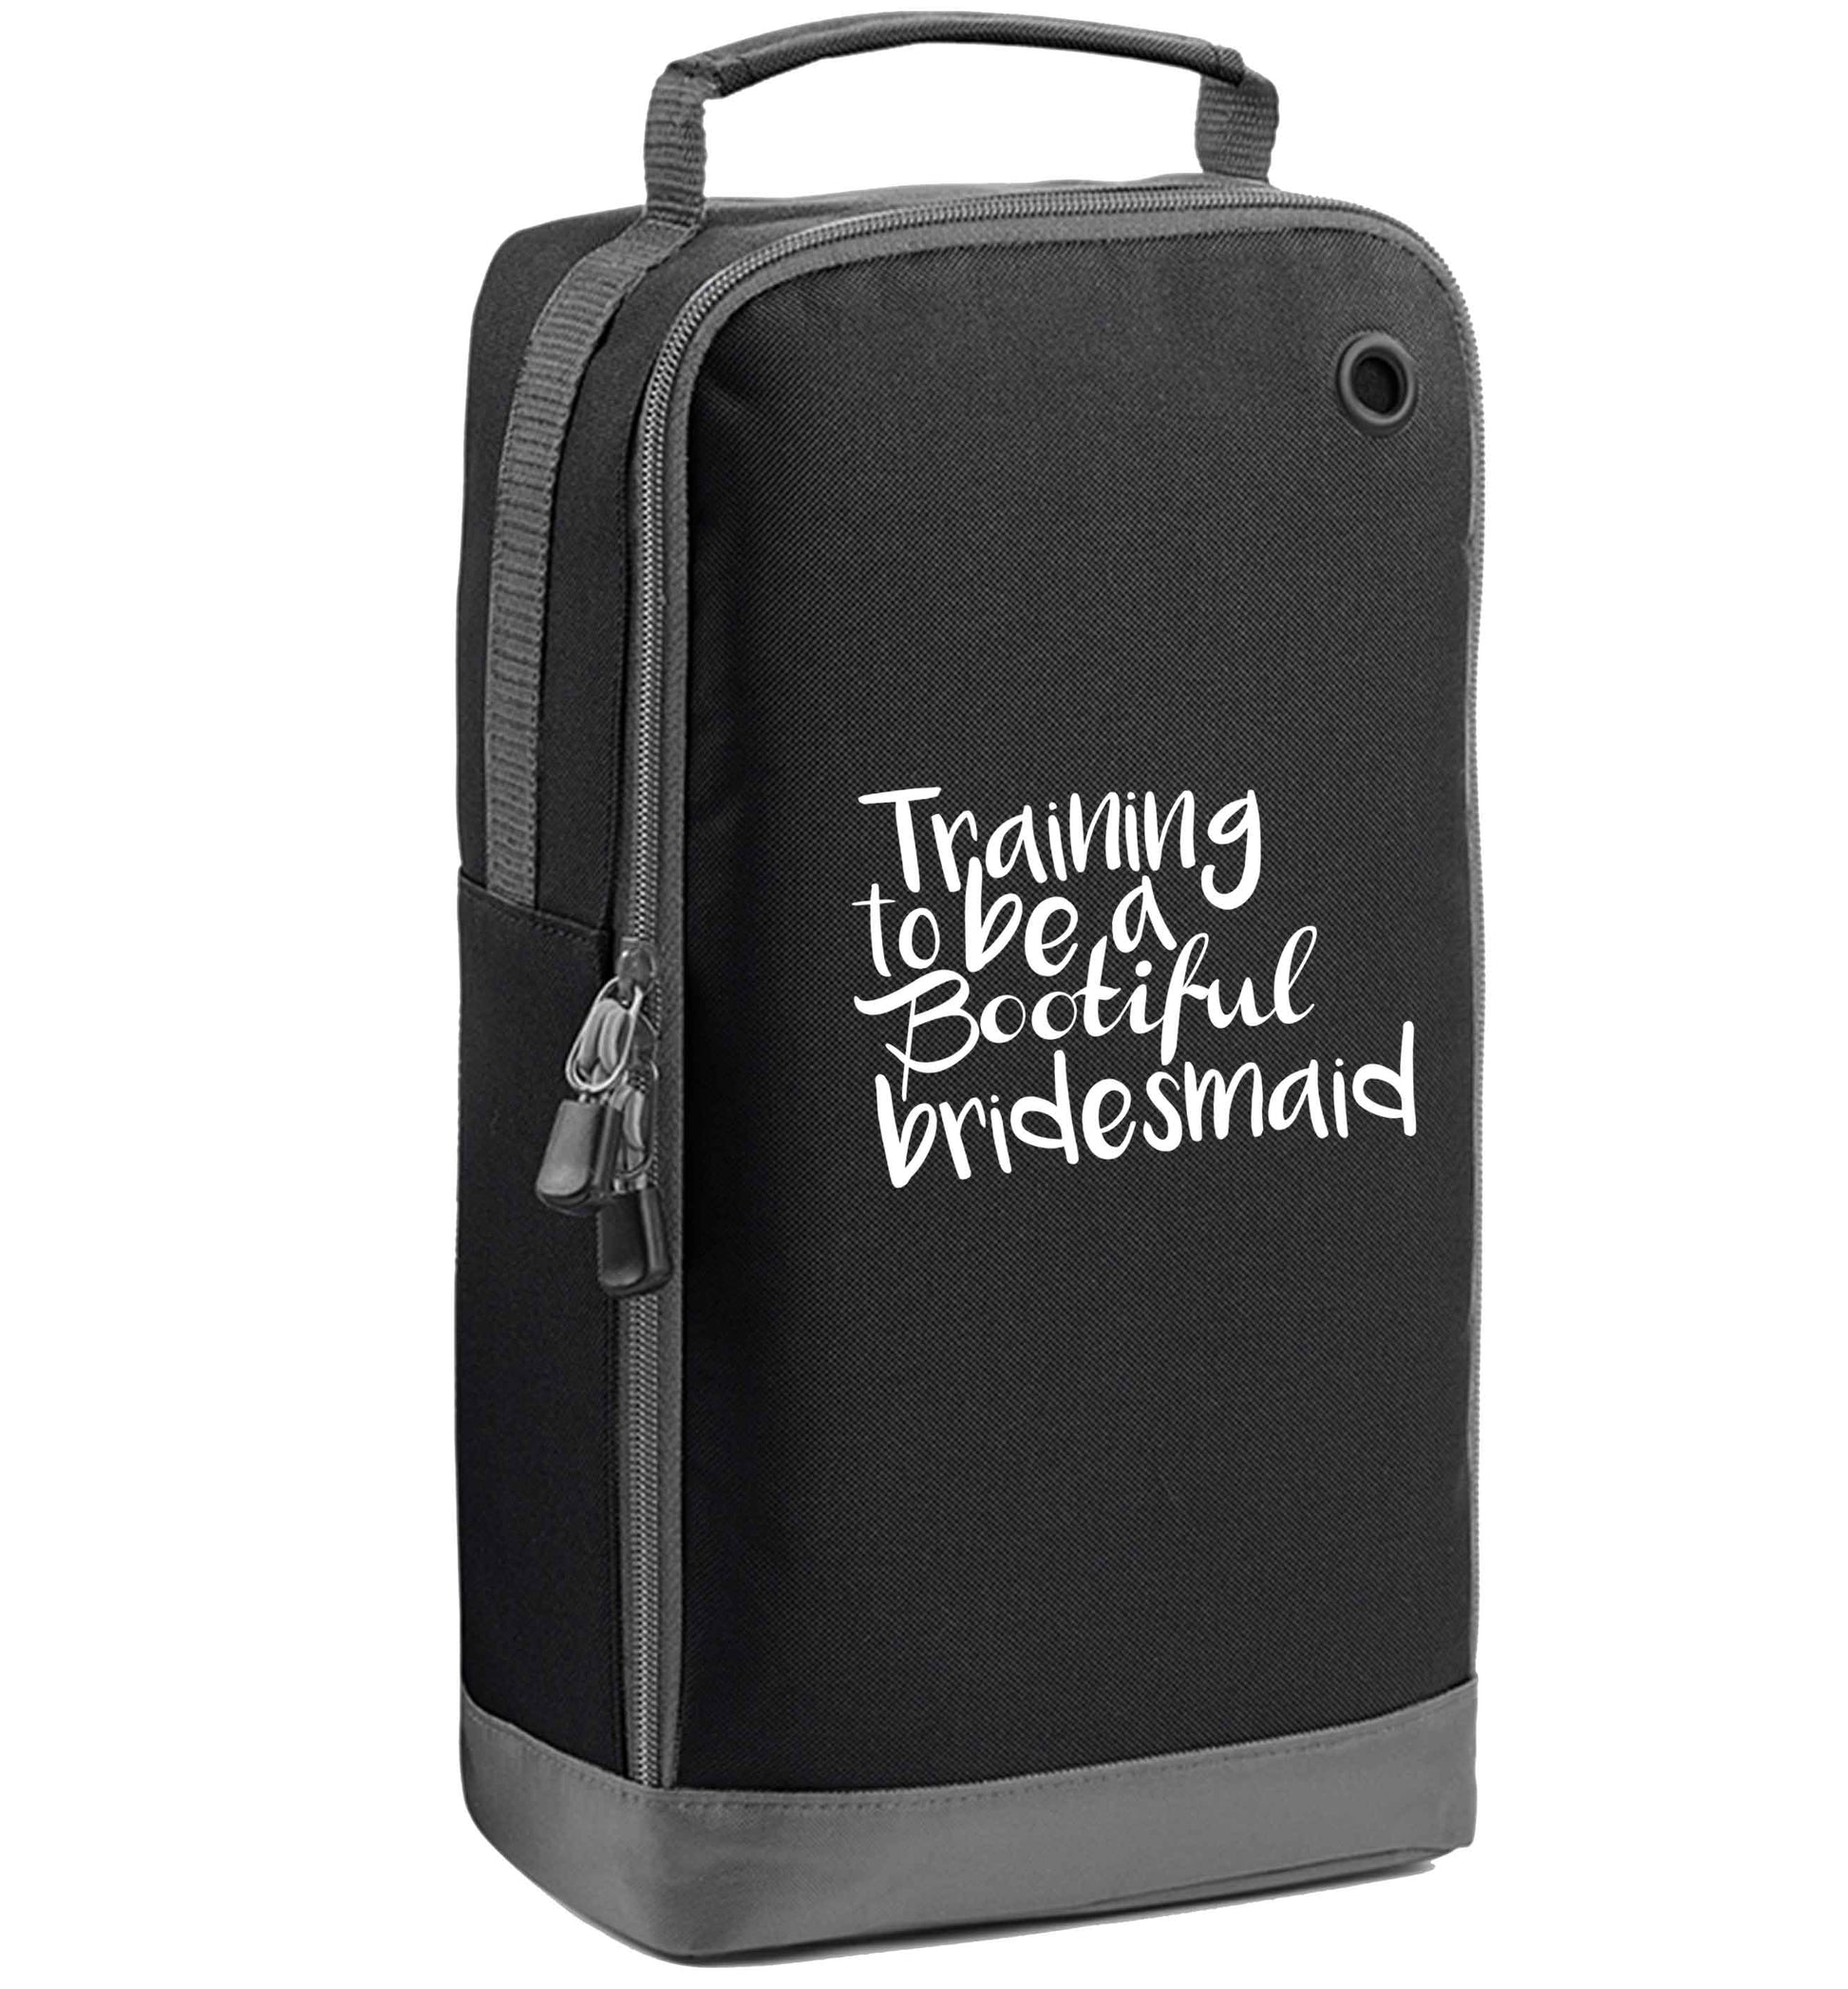 Get motivated and get fit for your big day! Our workout quotes and designs will get you ready to sweat! Perfect for any bride, groom or bridesmaid to be!  black sports shoe bag vertical print